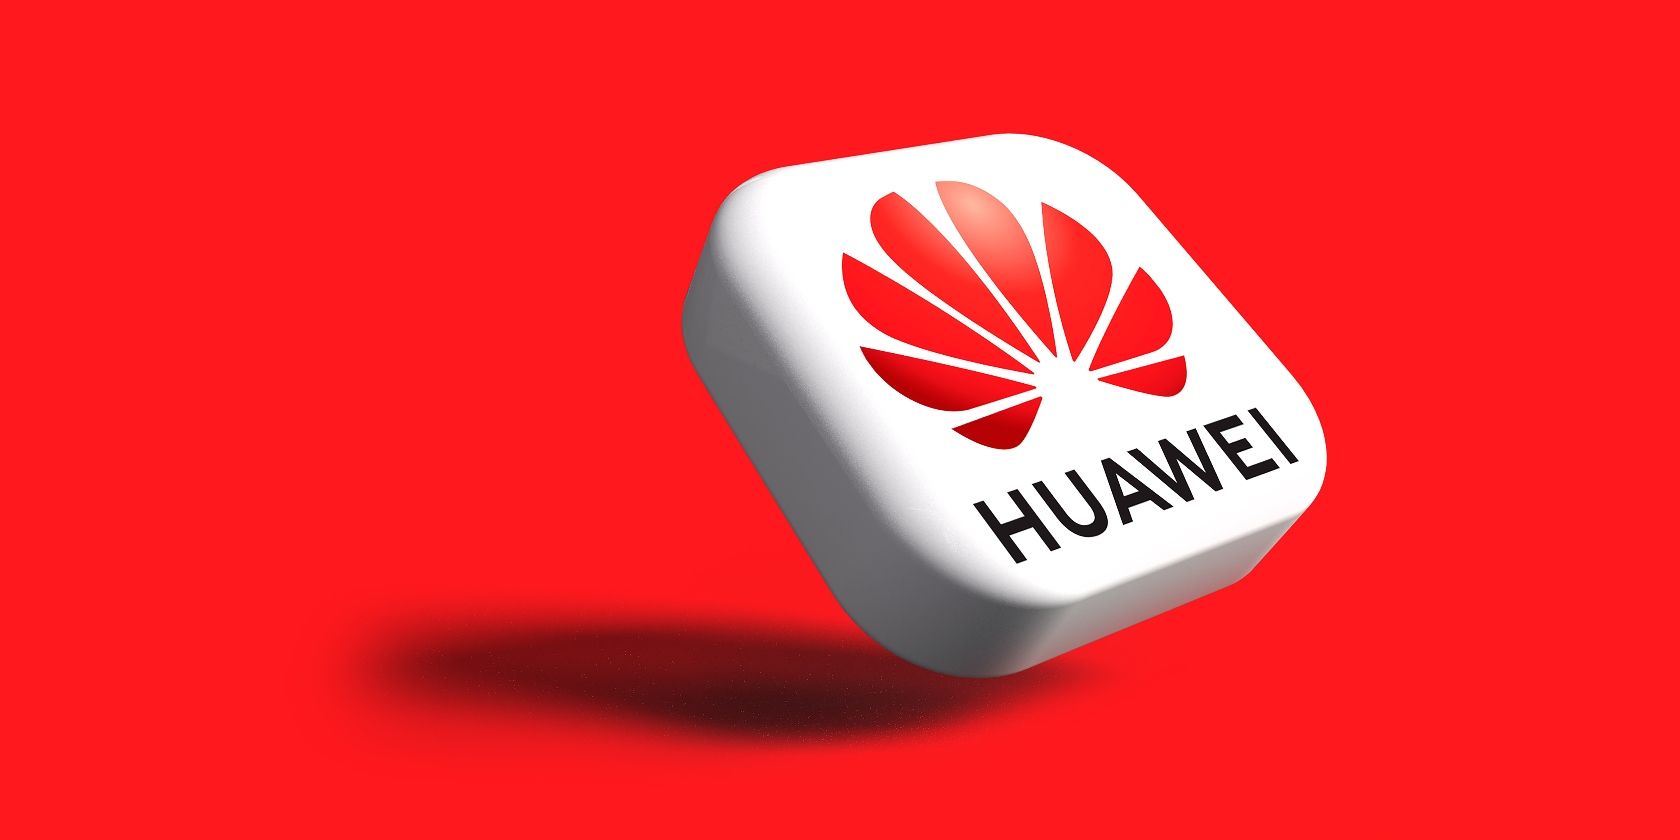 huawei 3d logo against red background